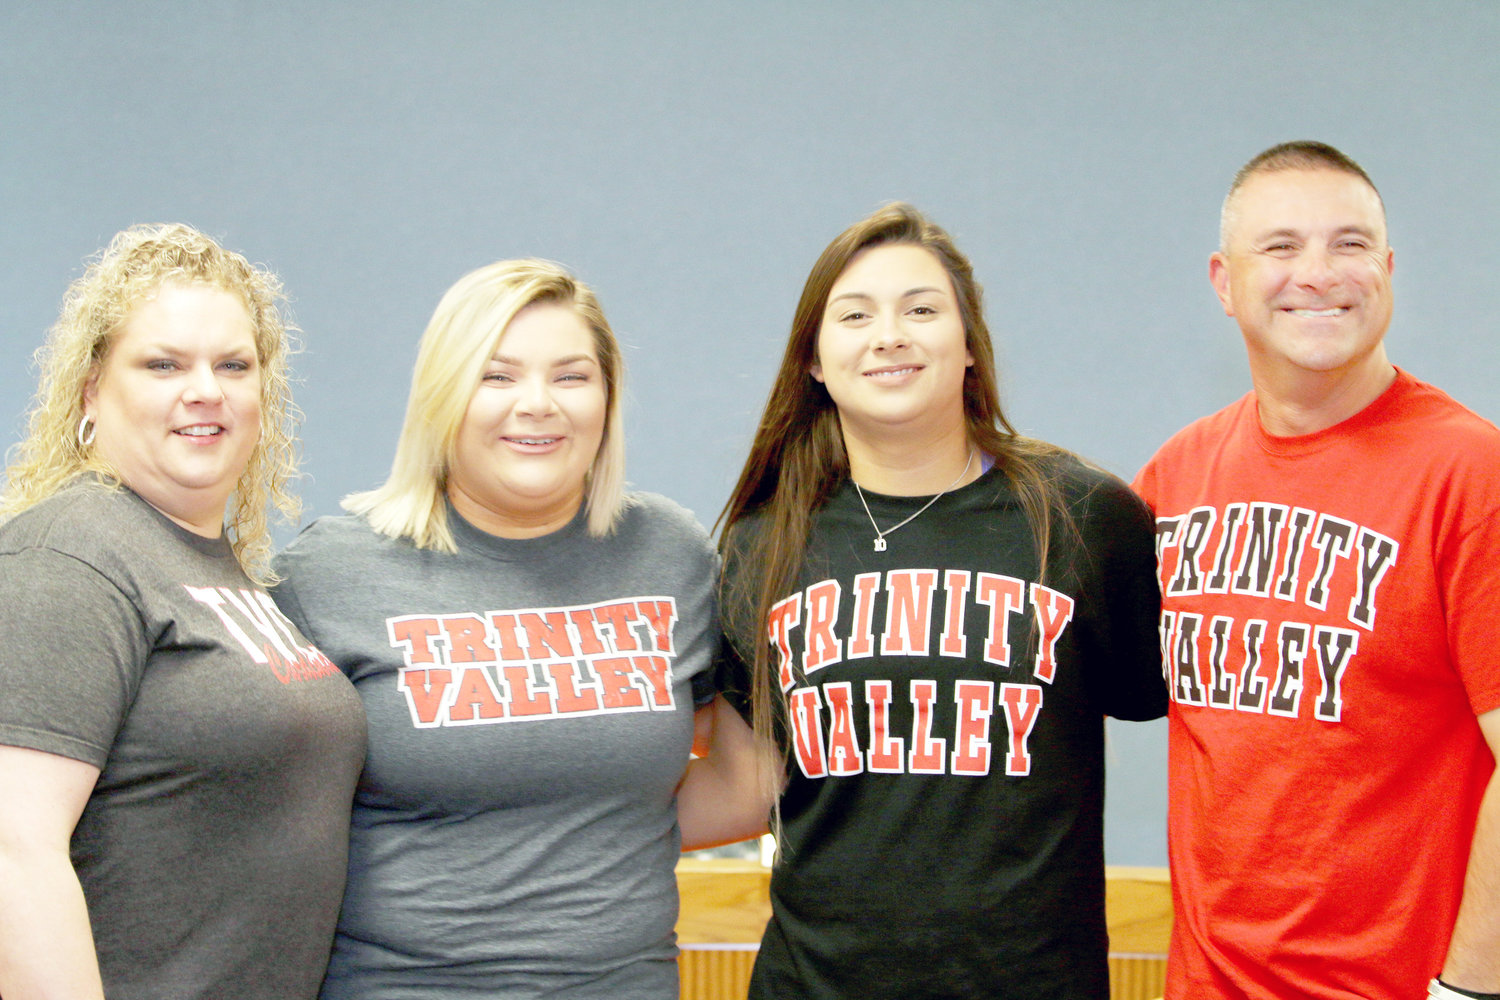 Mineola High School Senior Lauren Almuete signed her letter of intent to play volleyball at Trinity Valley Community College Thursday morning. She is shown with, from left, her mother Winona Almuete, sister Brooke Almuete and her father, Stephen Almuete. (Photo courtesy Tristan Mosher)